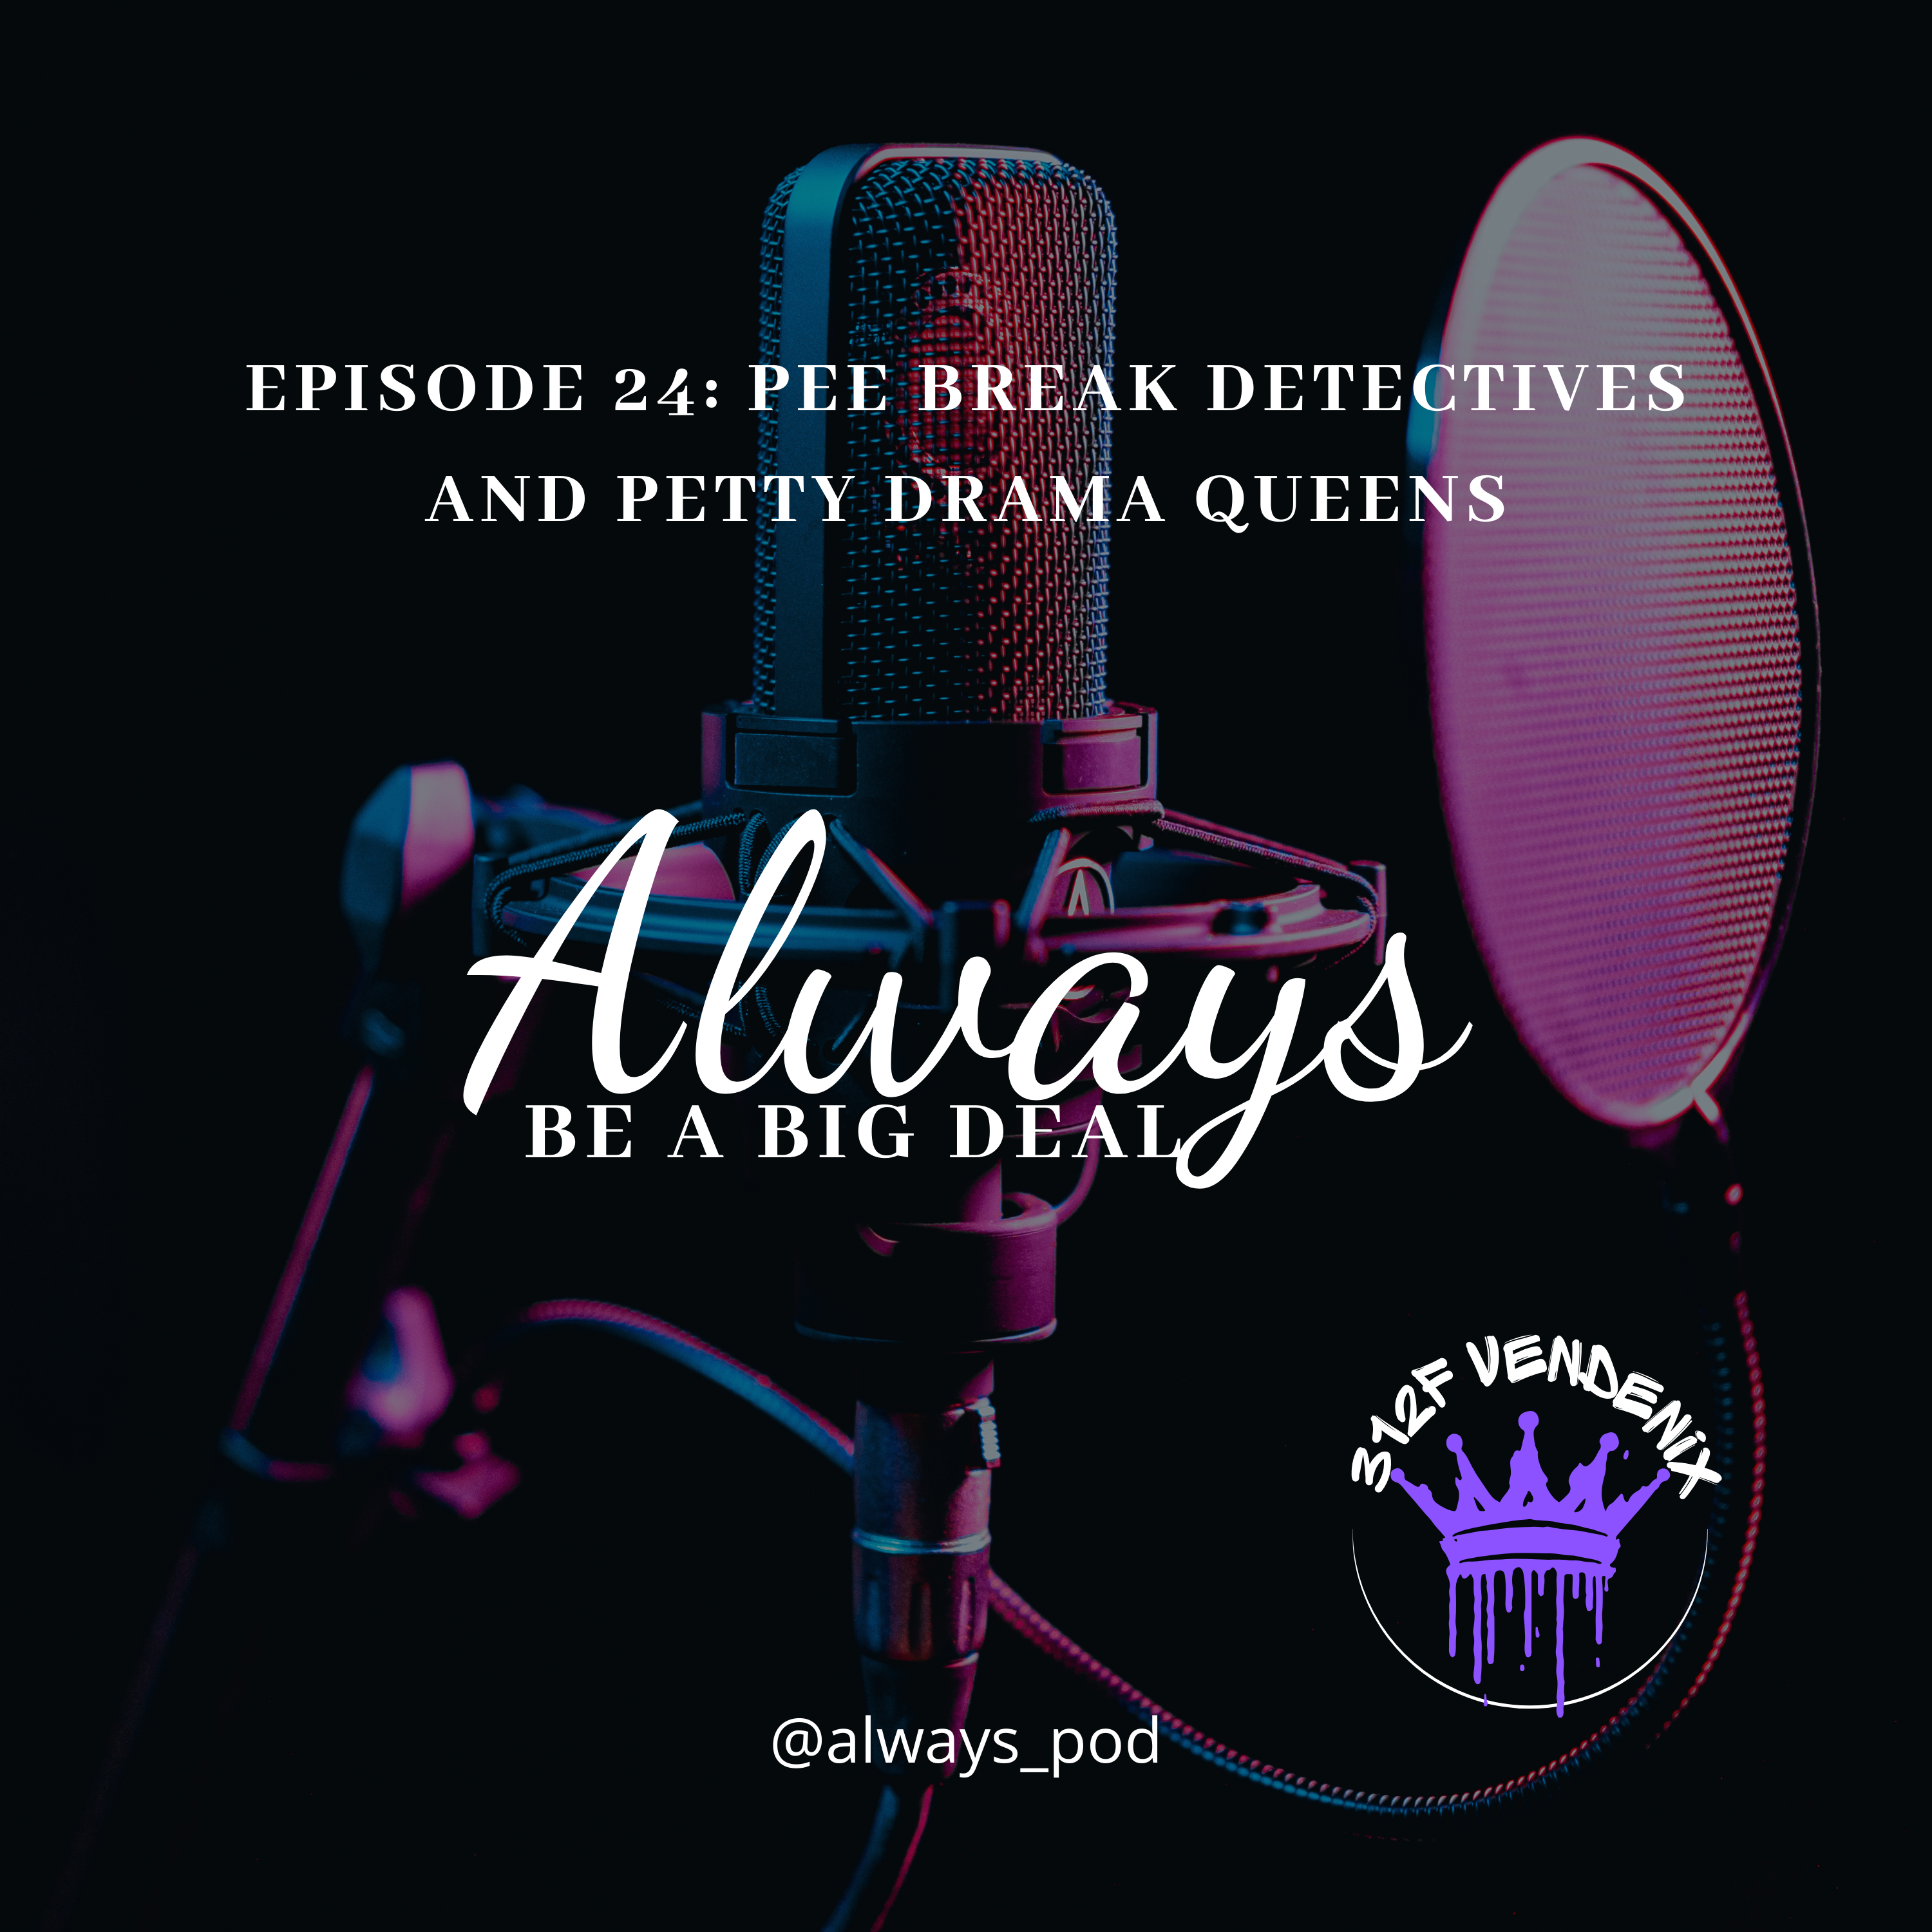 Episode 24 - Pee Break Detectives and Petty Drama Queens